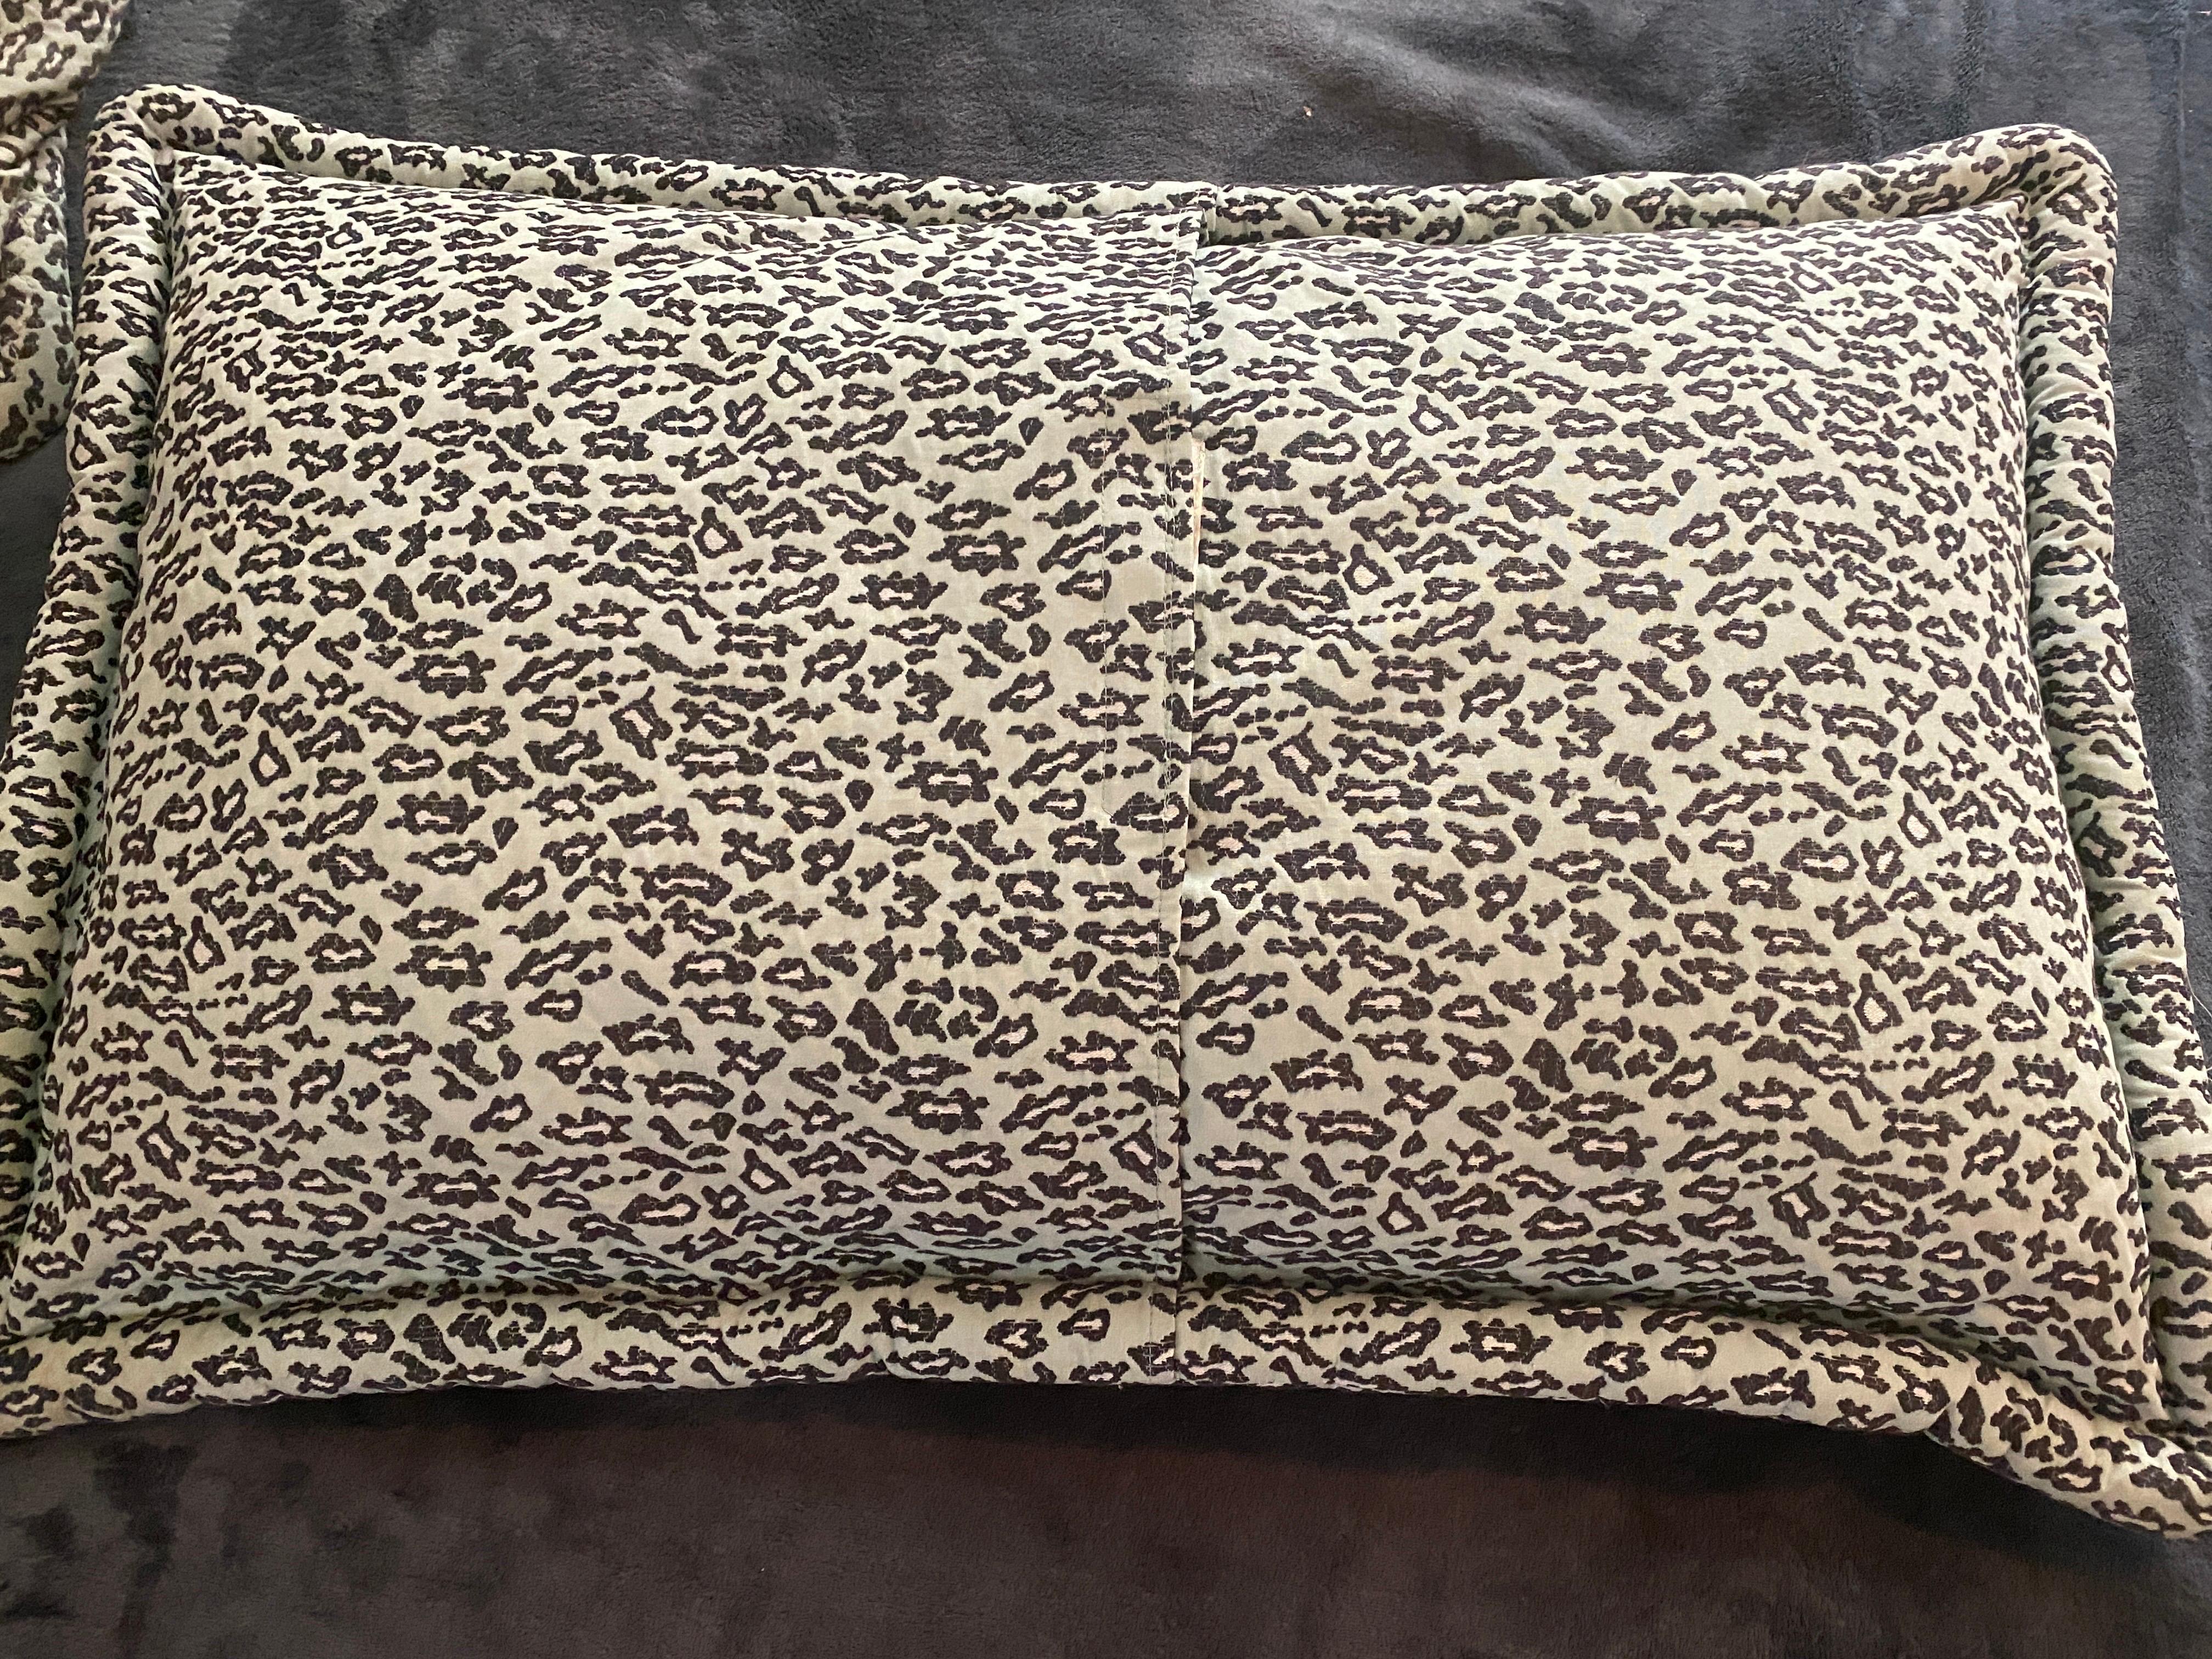 Late 20th Century Pair of Rare Jay Spectre Quilted Pillow Shams in Mint & Black/White Leopard  For Sale